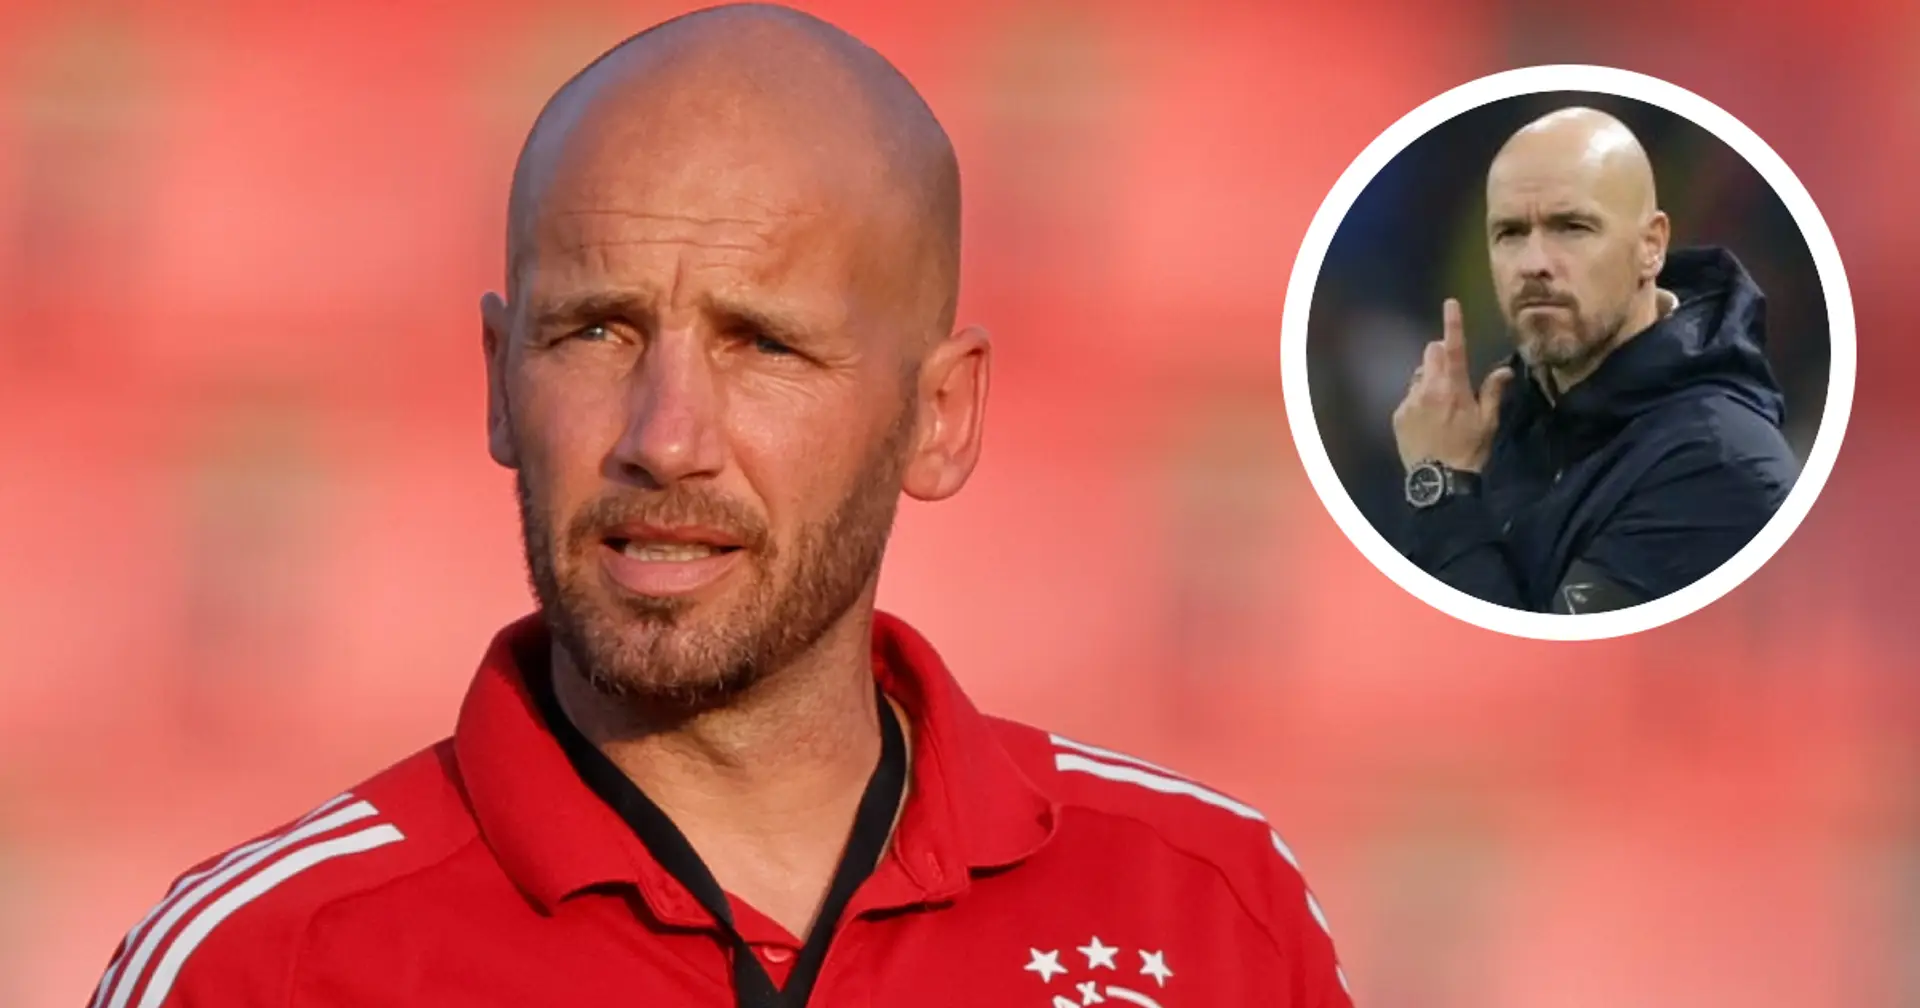 Fabrizio Romano: Mitchell van der Gaag 'reaches full agreement' to become Ten Hag's assistant